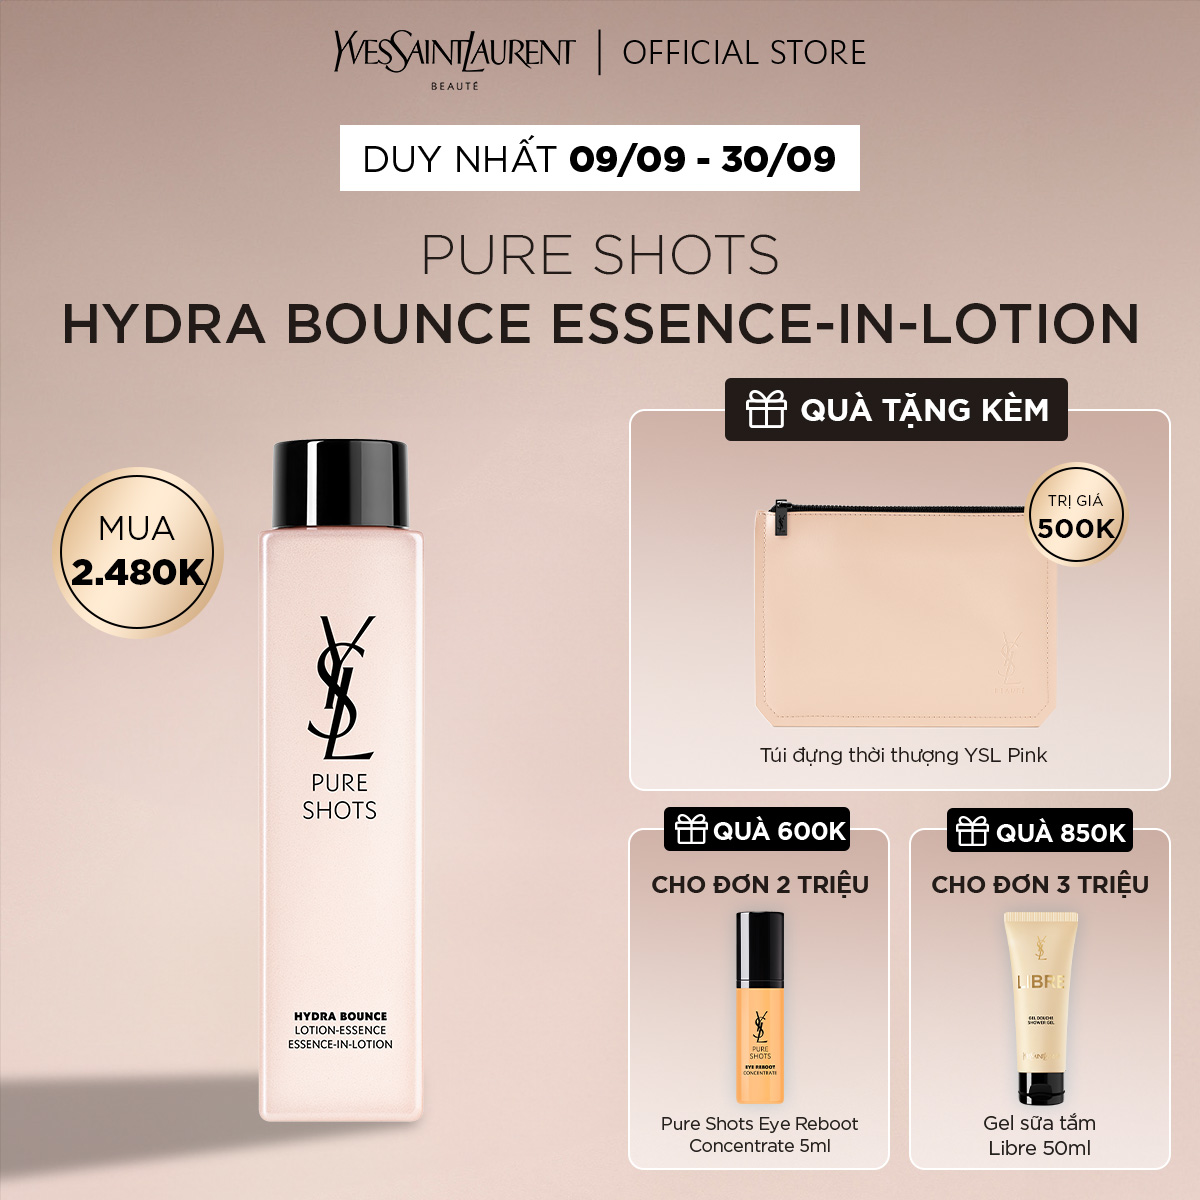 [SEP] Pure Shots Hydra Bounce Essence-in-Lotion